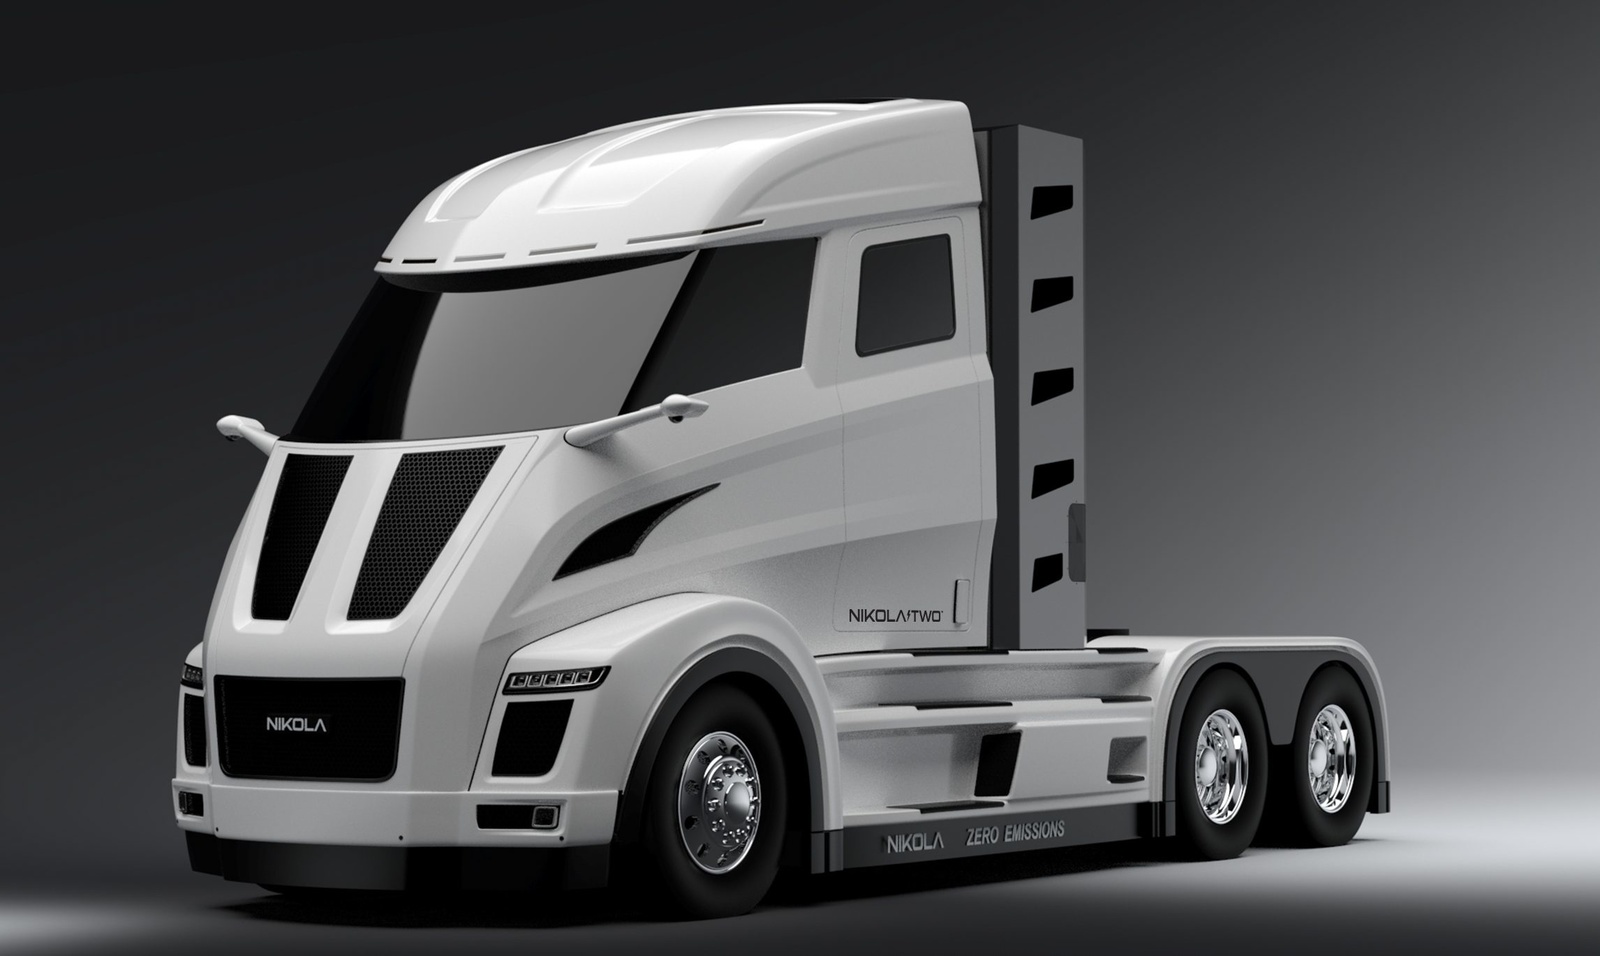 The powertrain for the electric long-haul truck